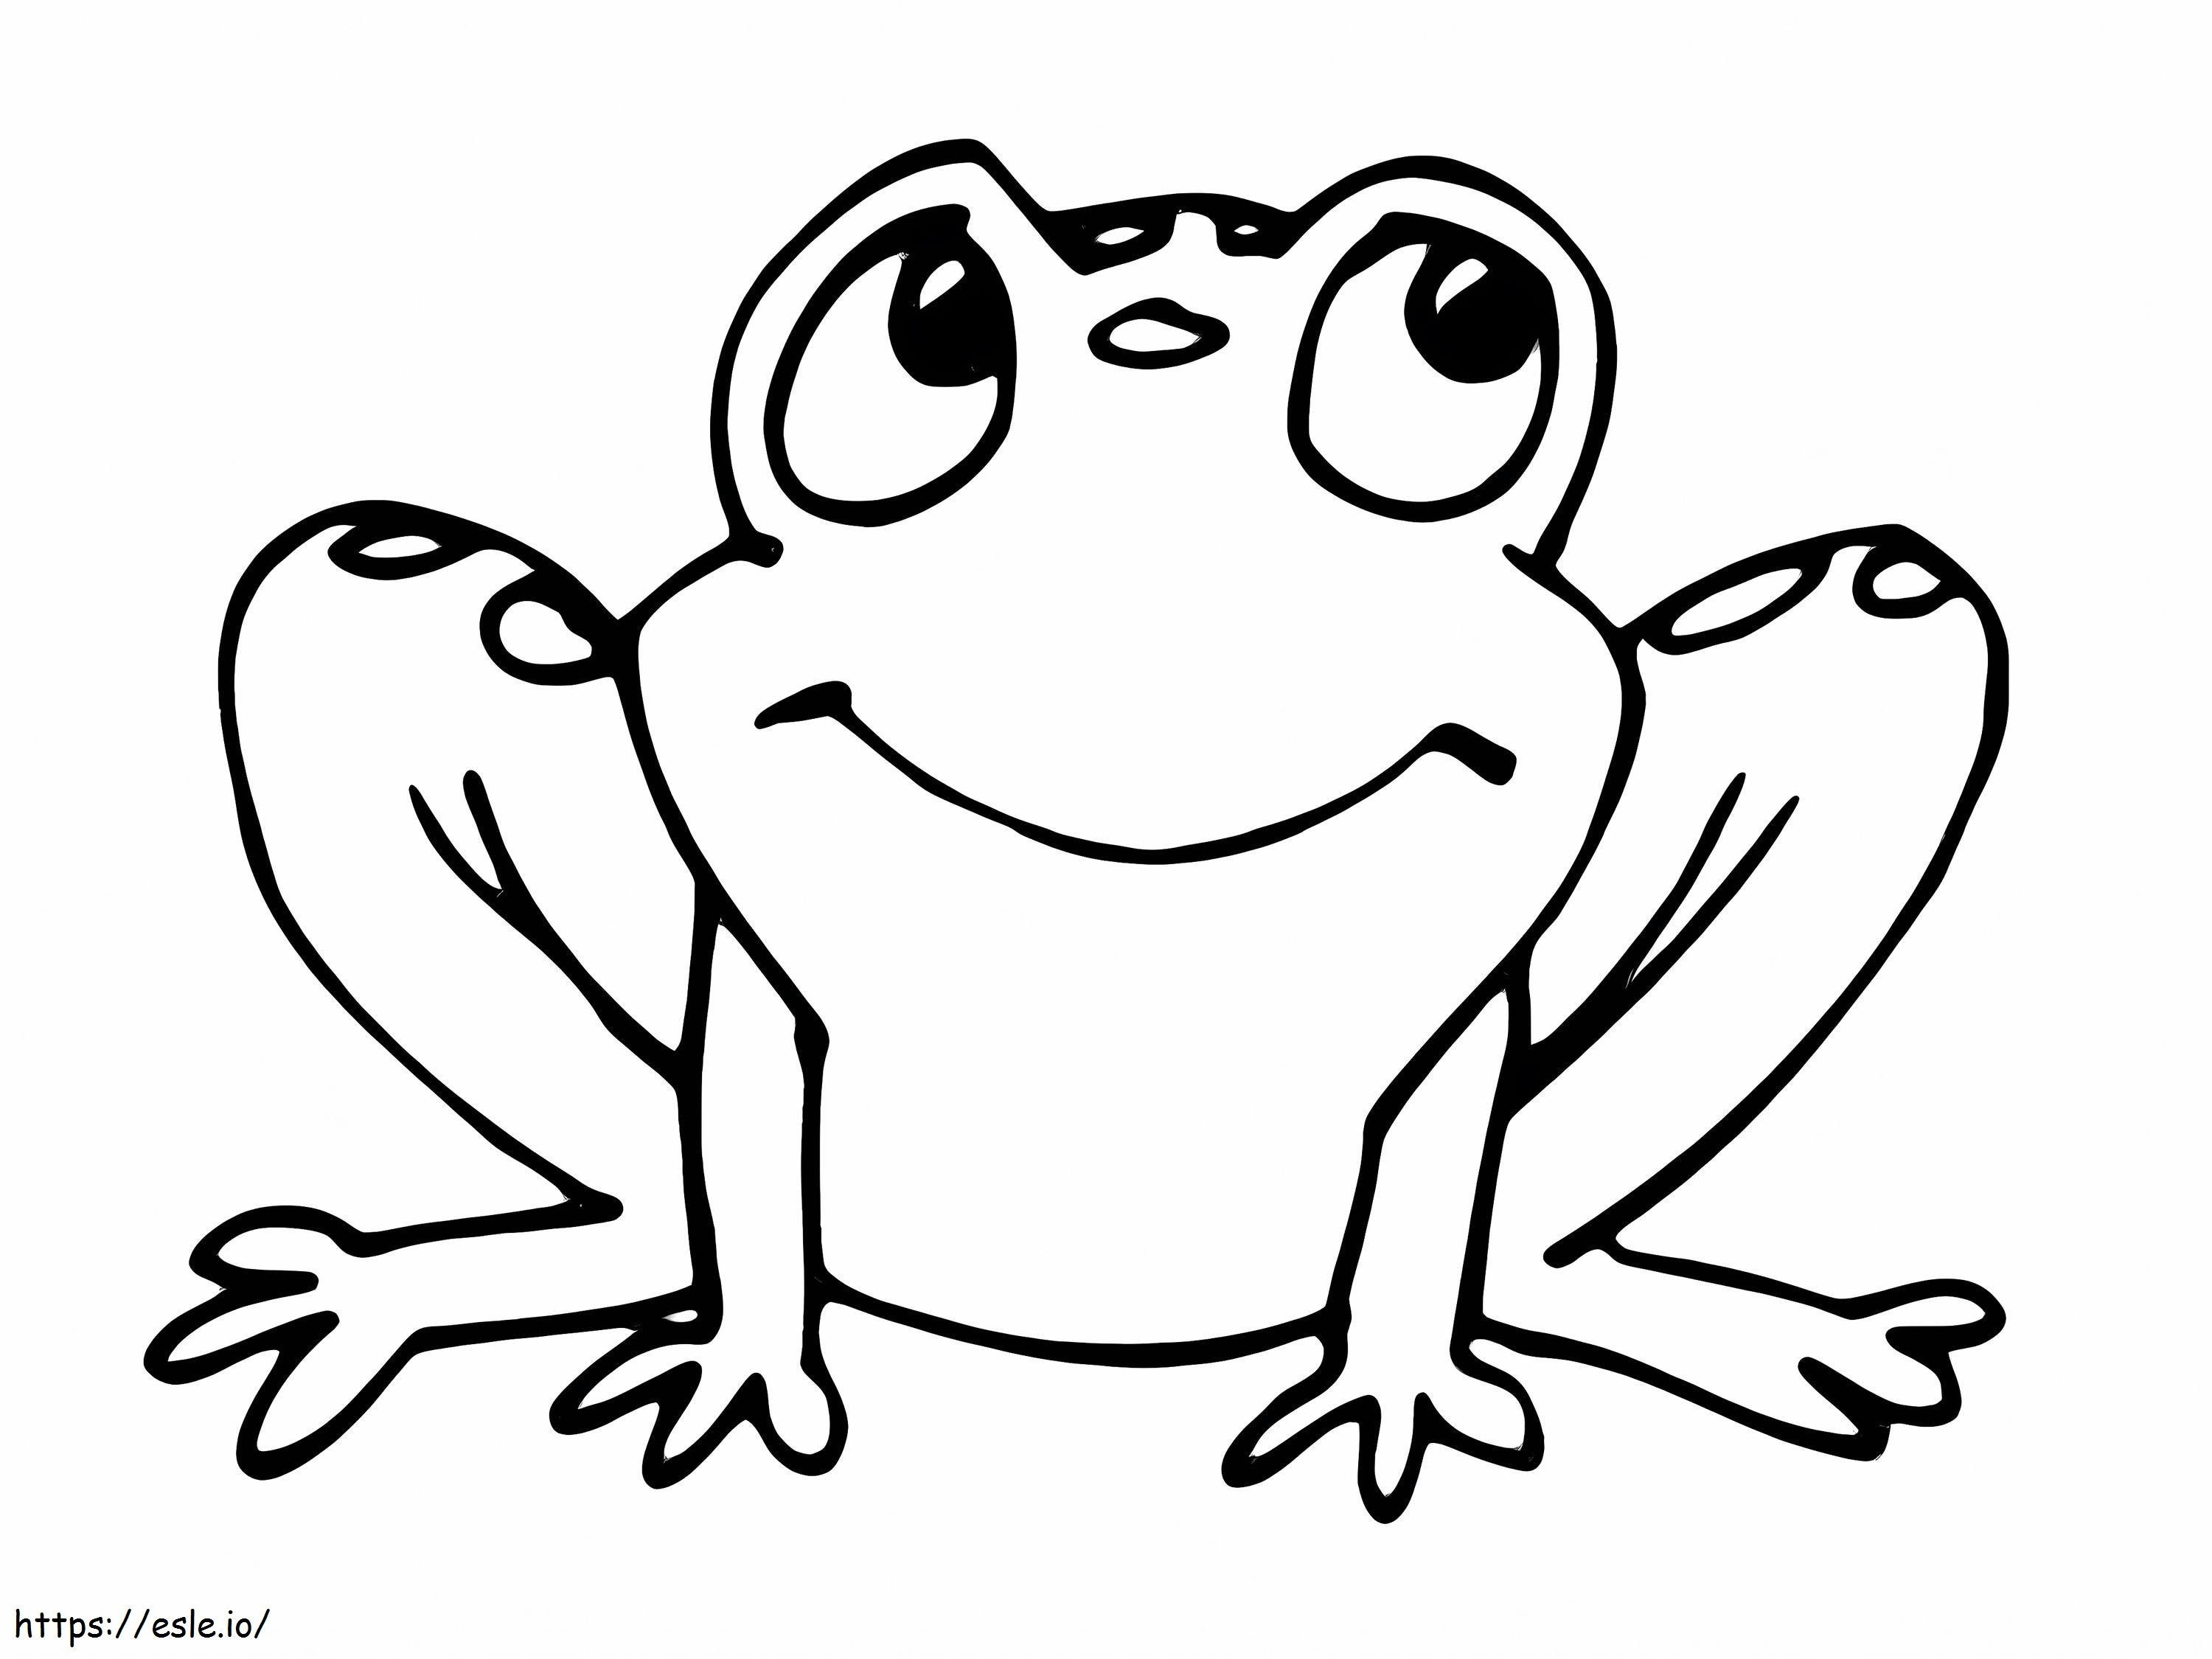 Funny Frog coloring page